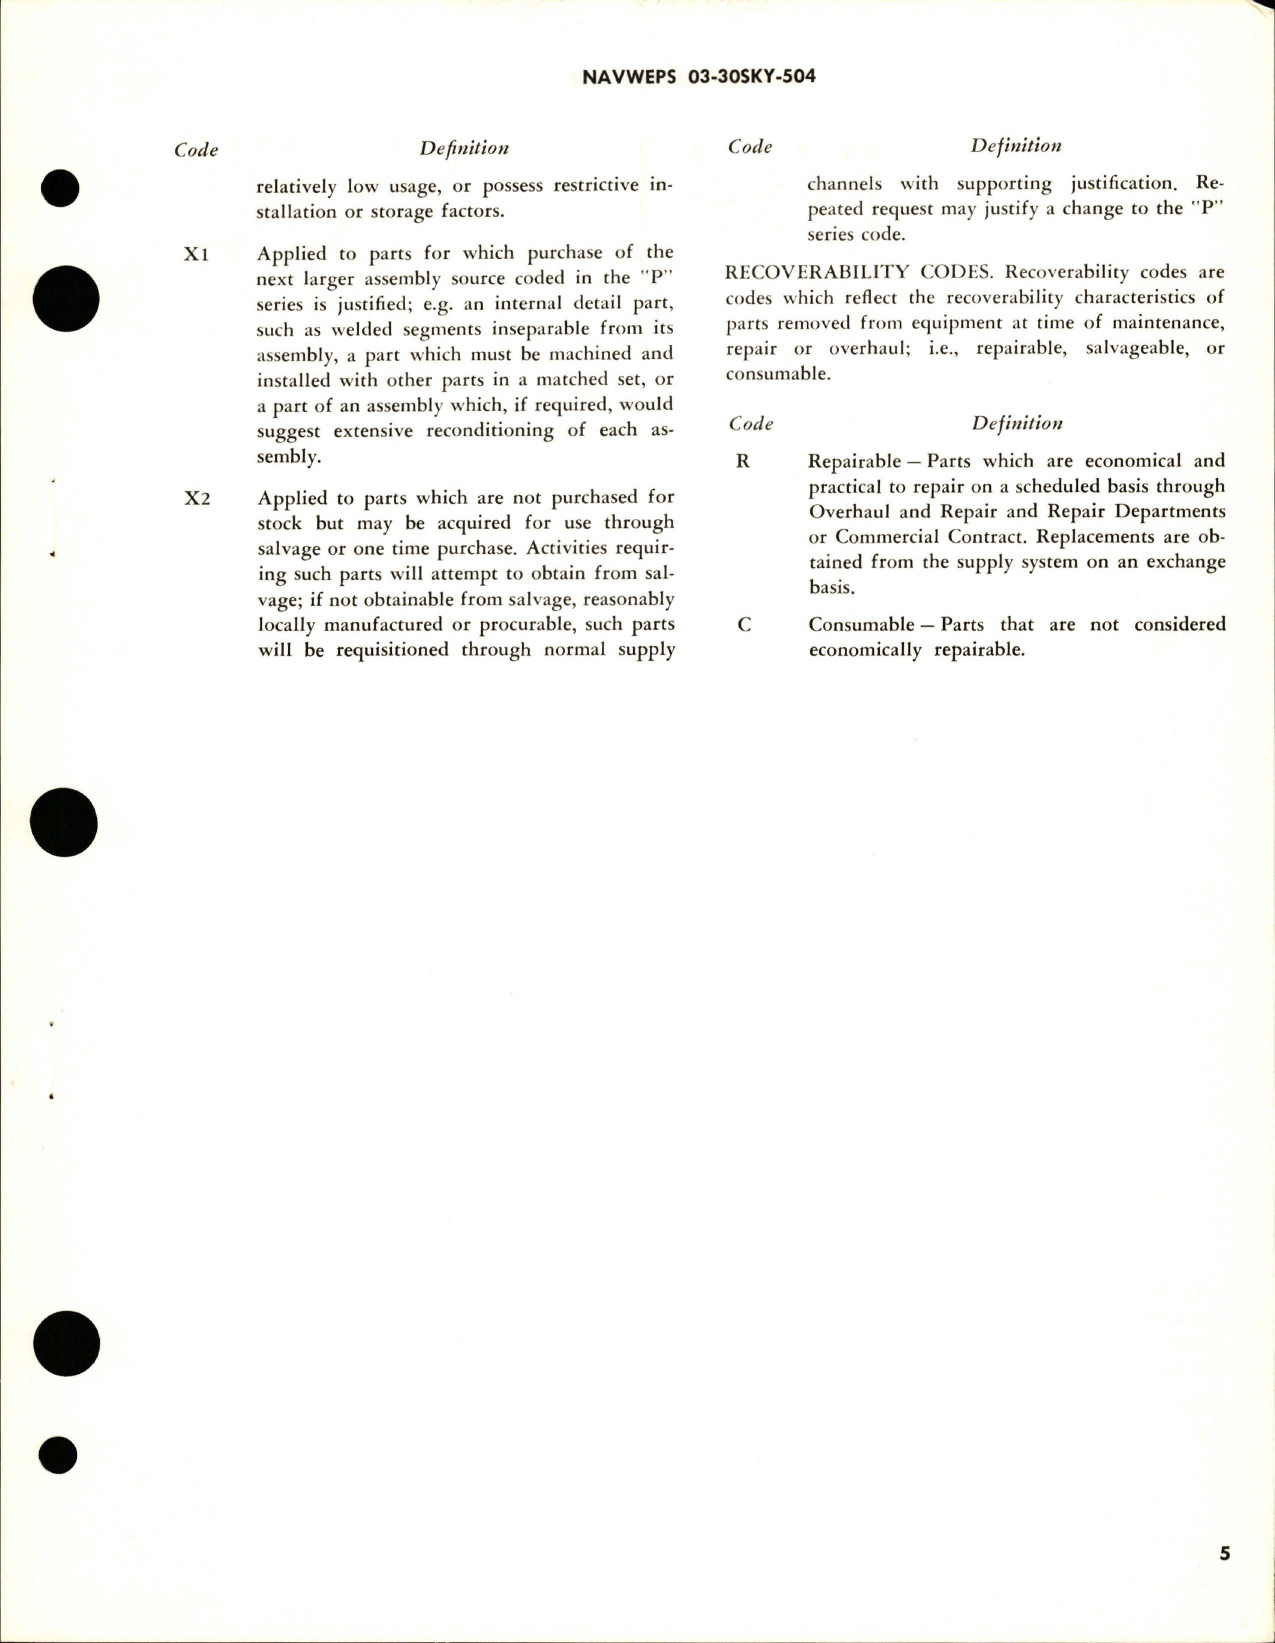 Sample page 5 from AirCorps Library document: Overhaul Instructions with Parts for Main Landing Gear Lower Drag Link Assembly - S1525-50105 and S1525-50105-1